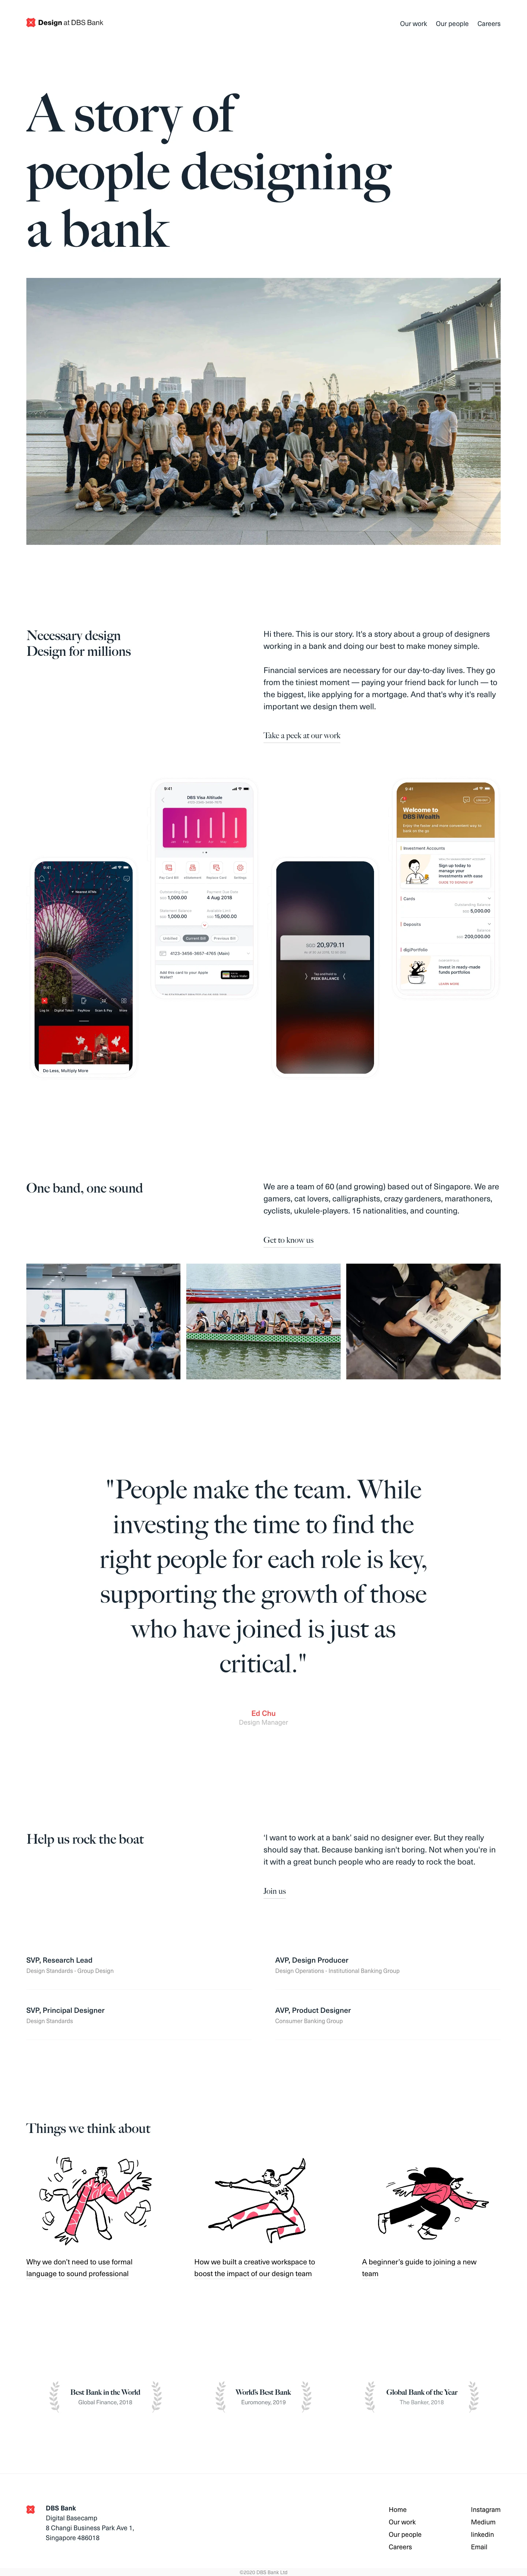 Design at DBS Bank Landing Page Example: We are the user experience (UX) design team at DBS bank in Singapore. And this is our story.